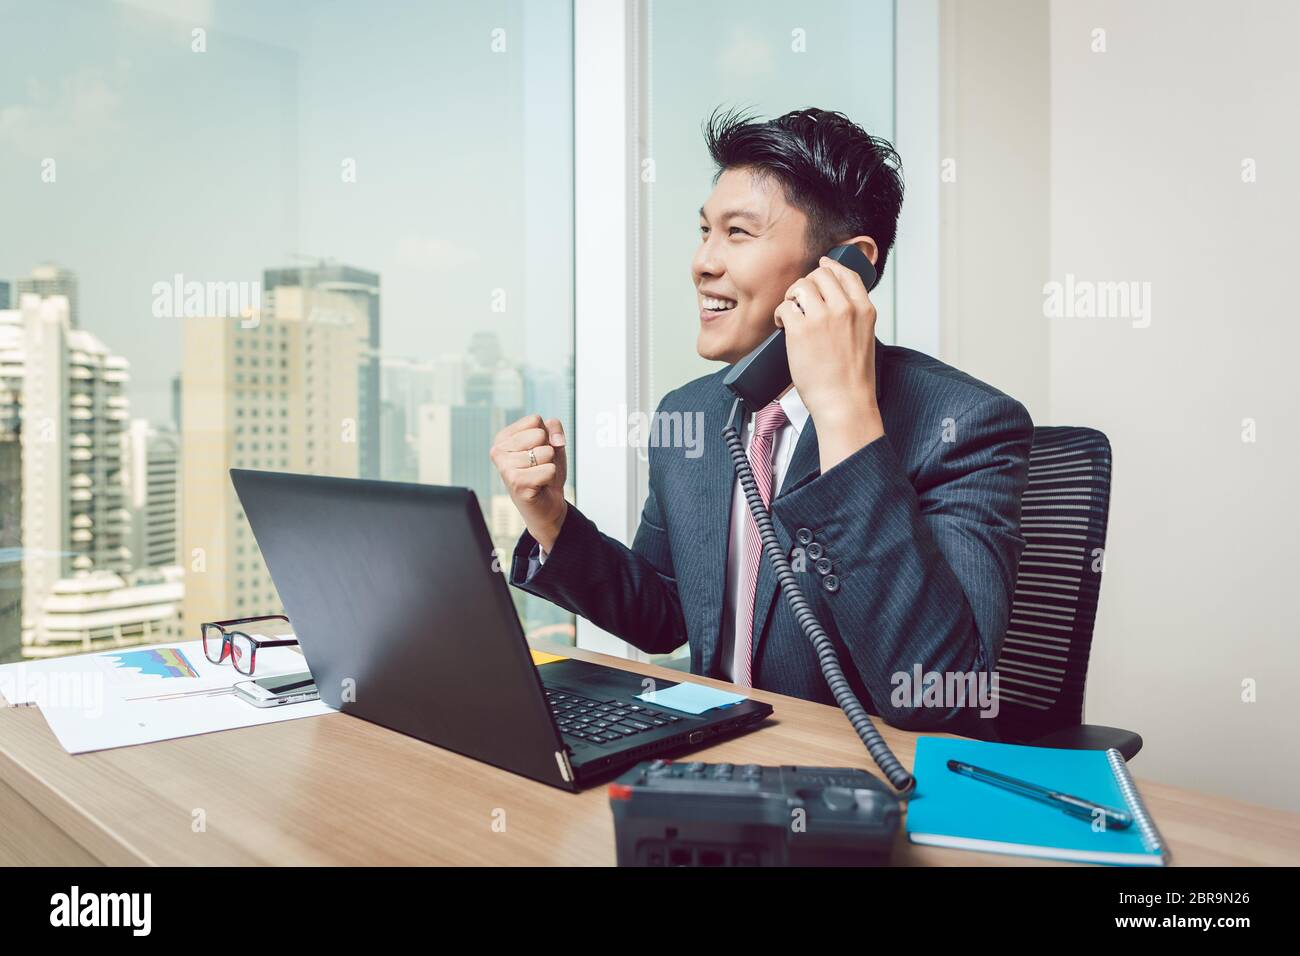 Portrait of successful smiling young businessman talking on telephone clenching his fist Stock Photo